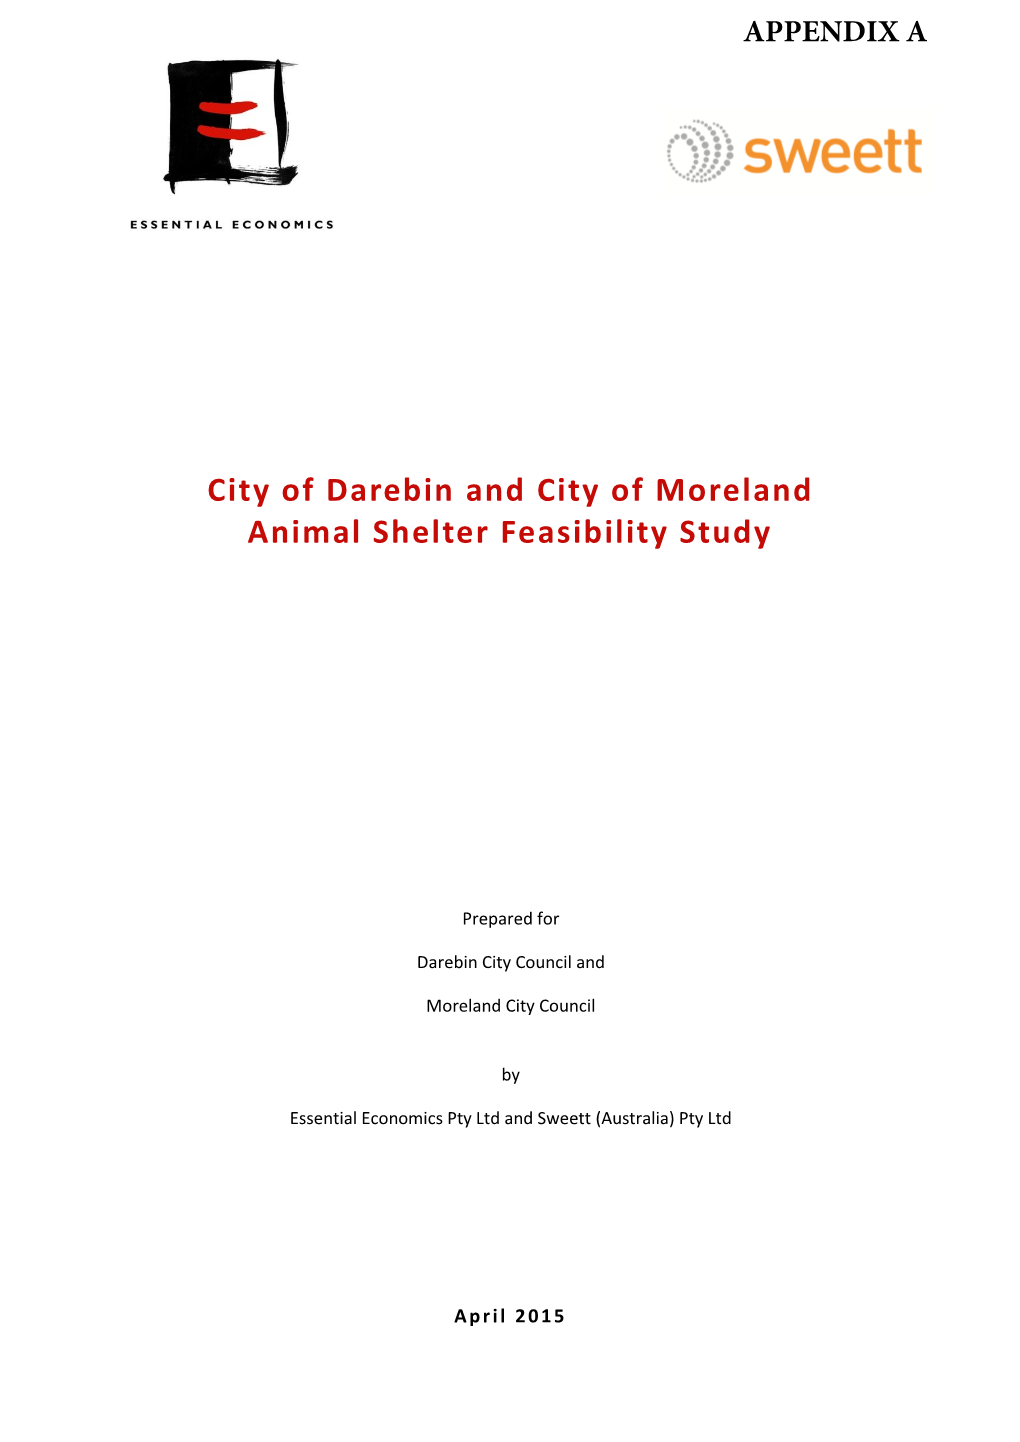 City of Darebin and City of Moreland Animal Shelter Feasibility Study